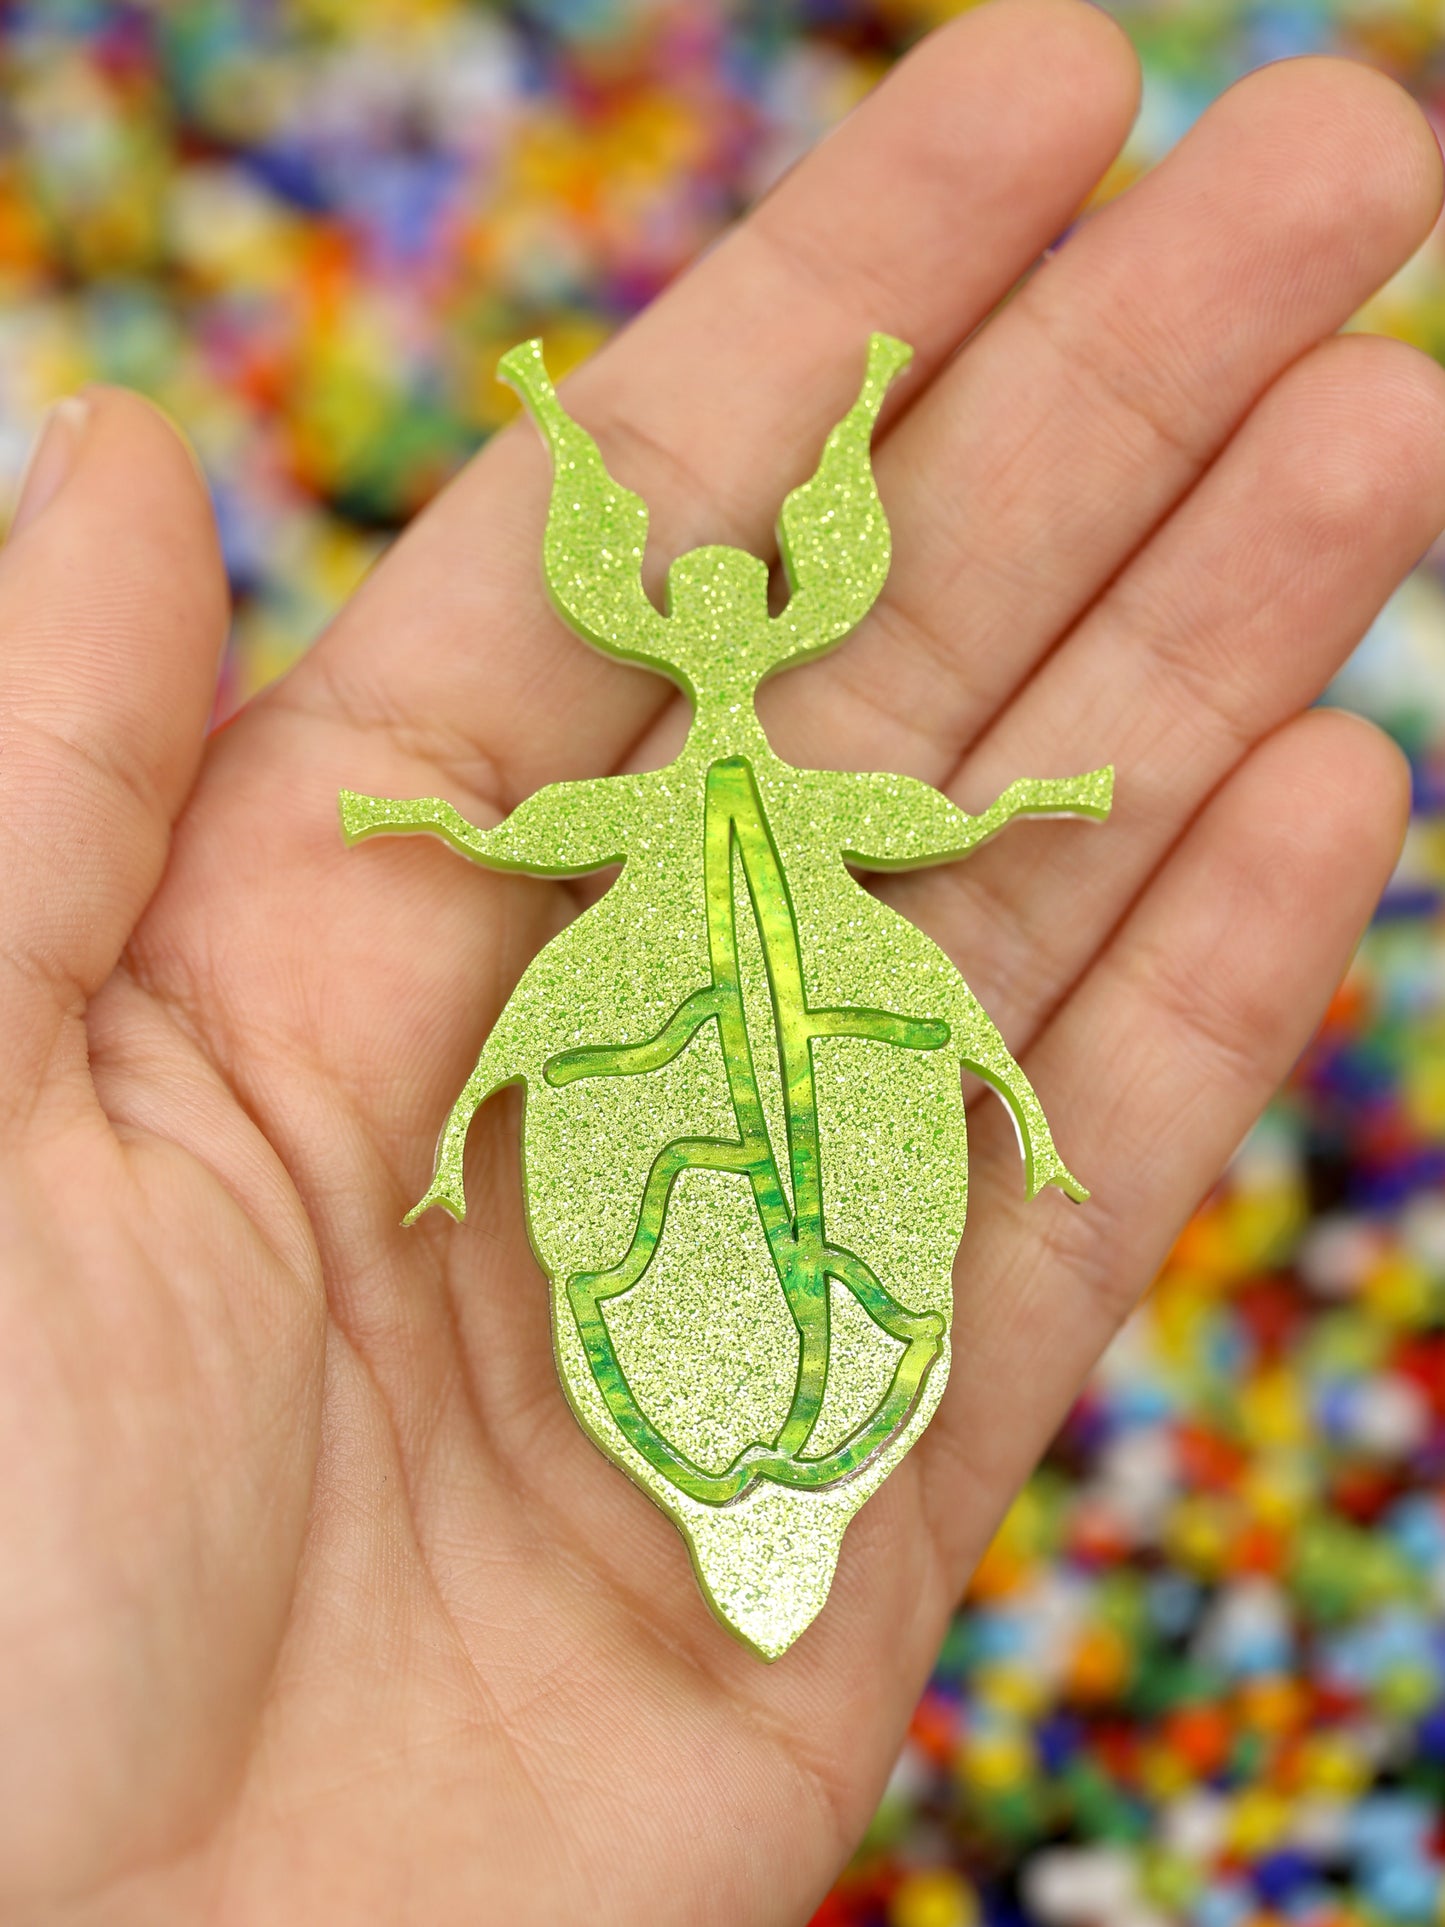 Monteith's Leaf-insect brooch